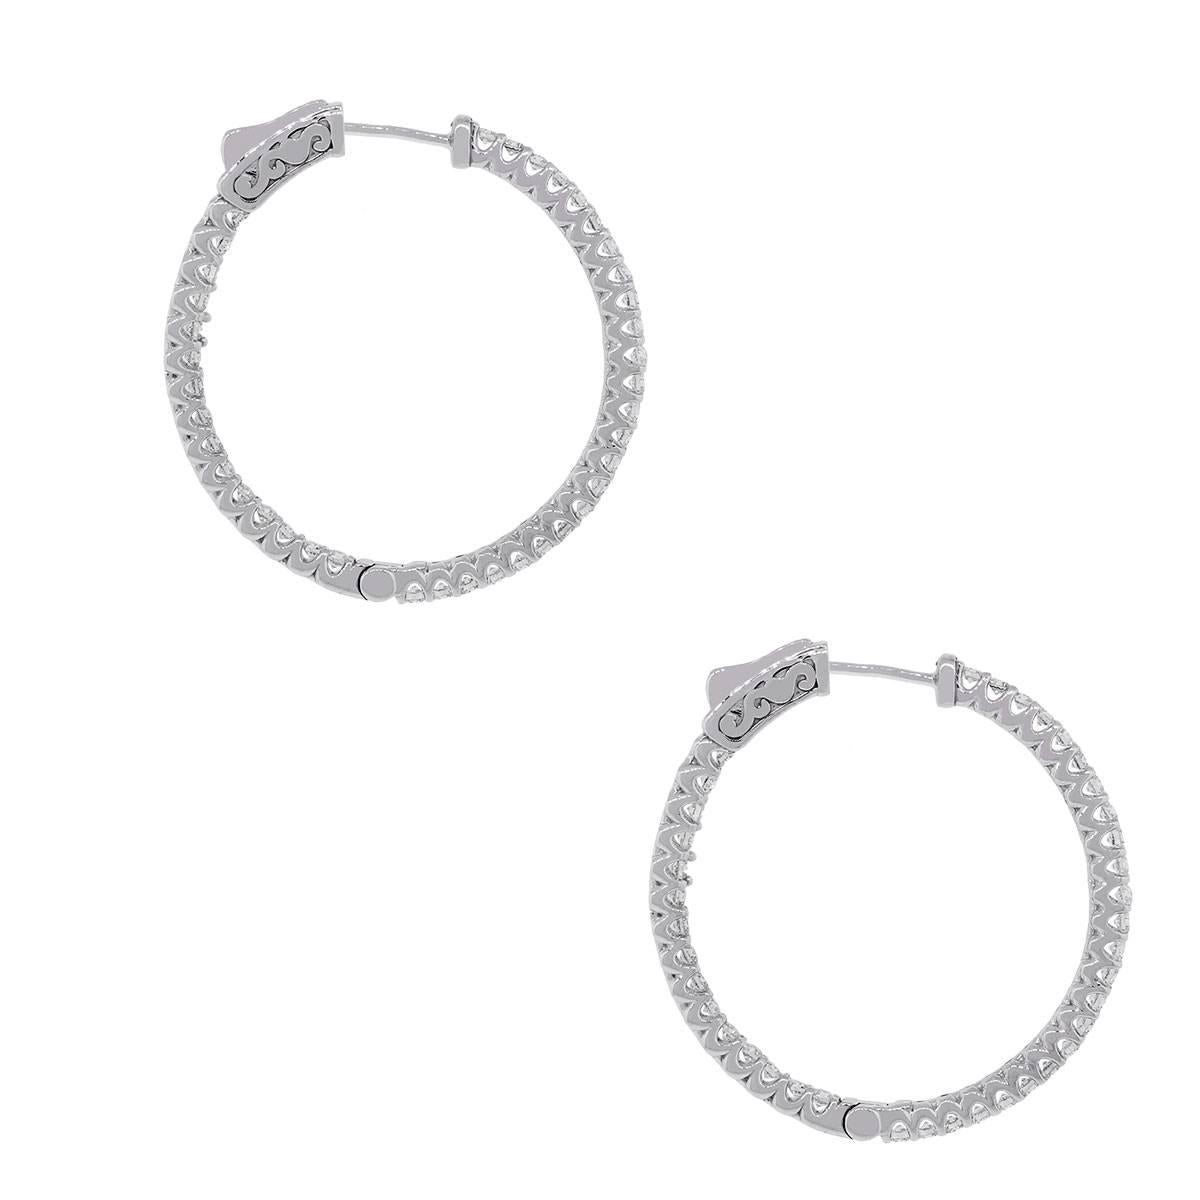 1.51 Carat Diamond White Gold Hoop Earrings In Excellent Condition For Sale In Boca Raton, FL